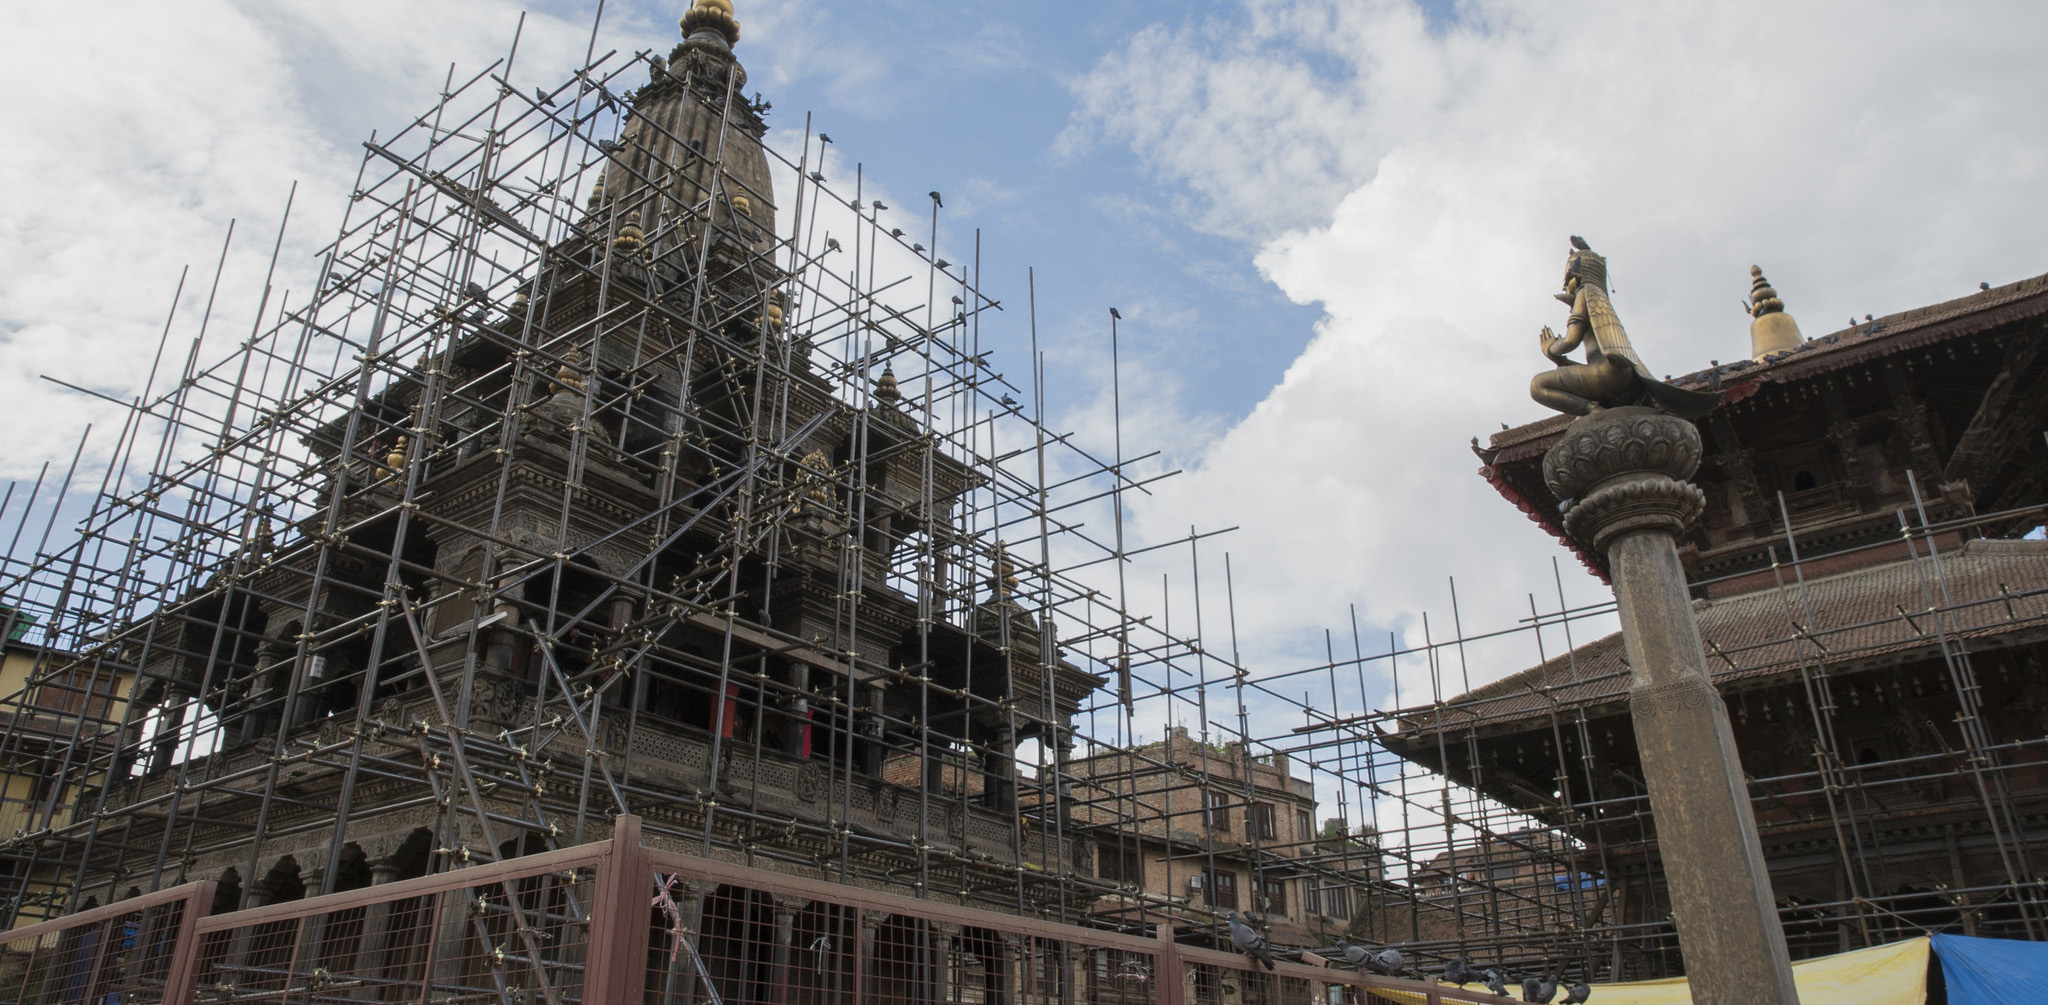 Scaffolding at the Patan Durbar Square in Lalitpur, Nepal. The April 2015 earthquake in Nepal damaged the square.